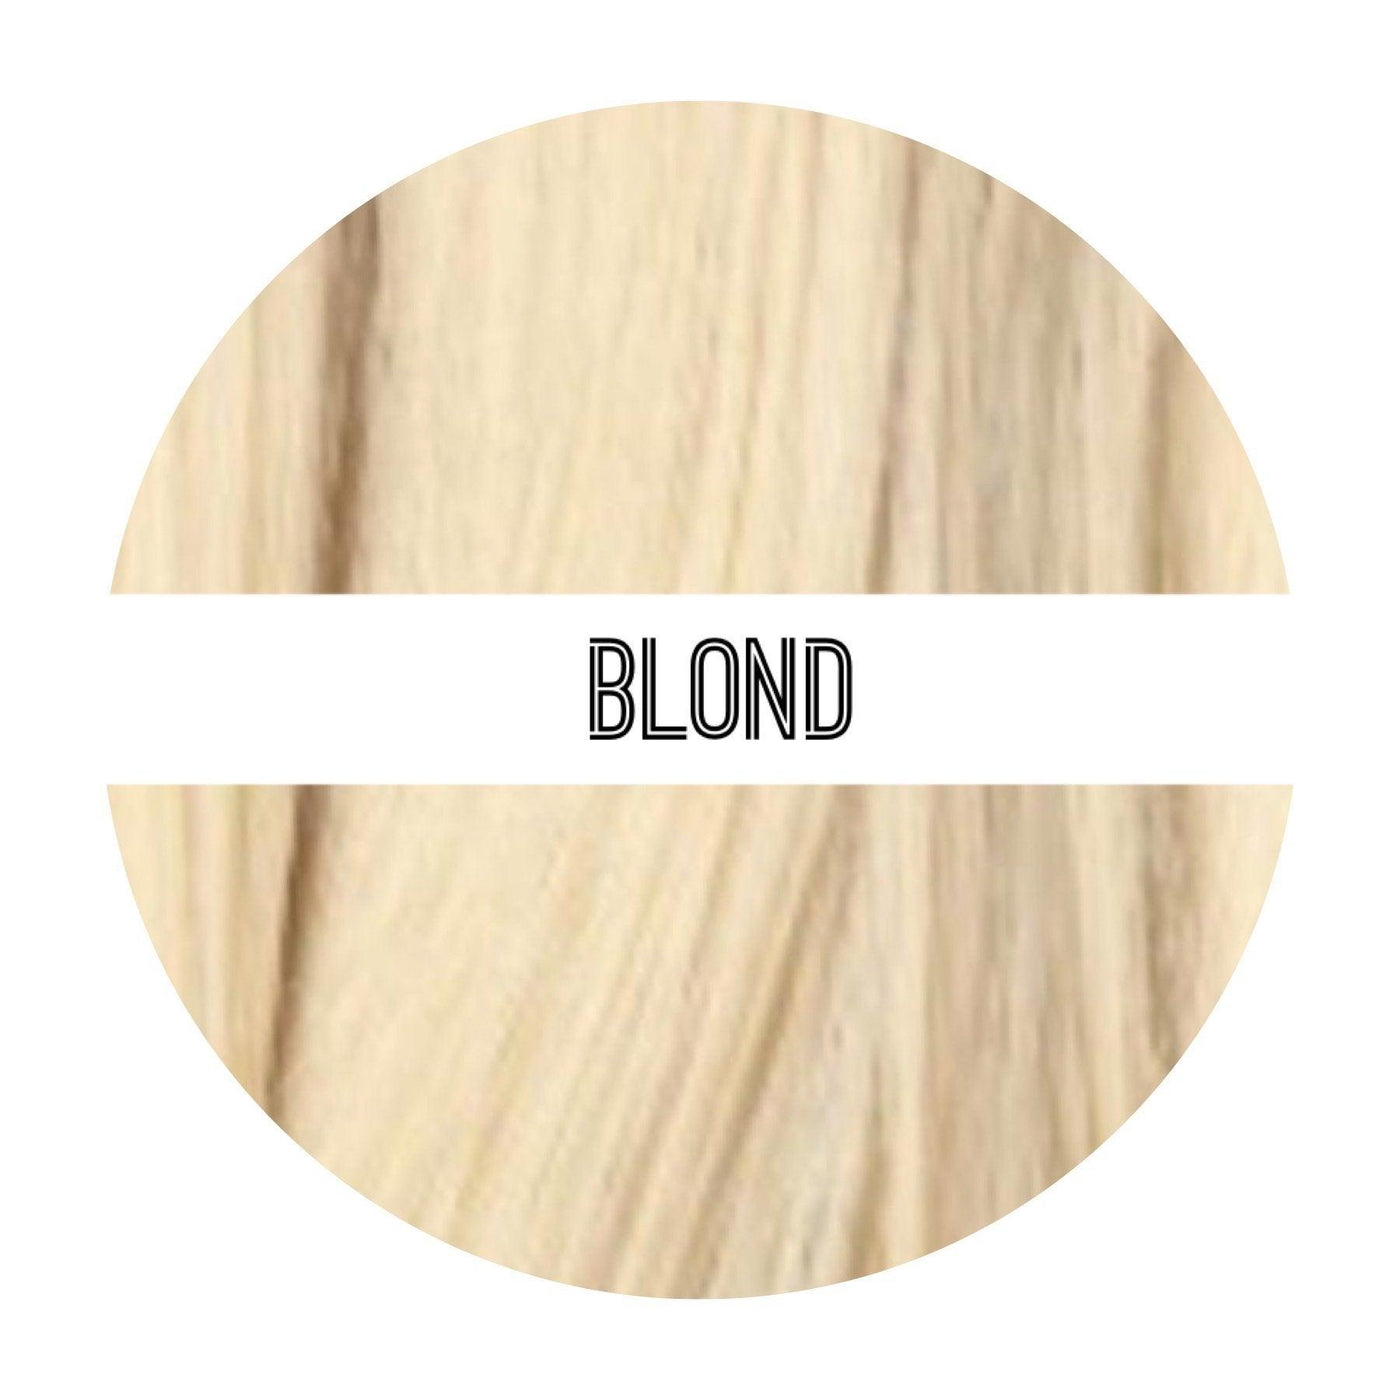 Hair Clips Blonde - Millionaire Beauty Brand Extensions 